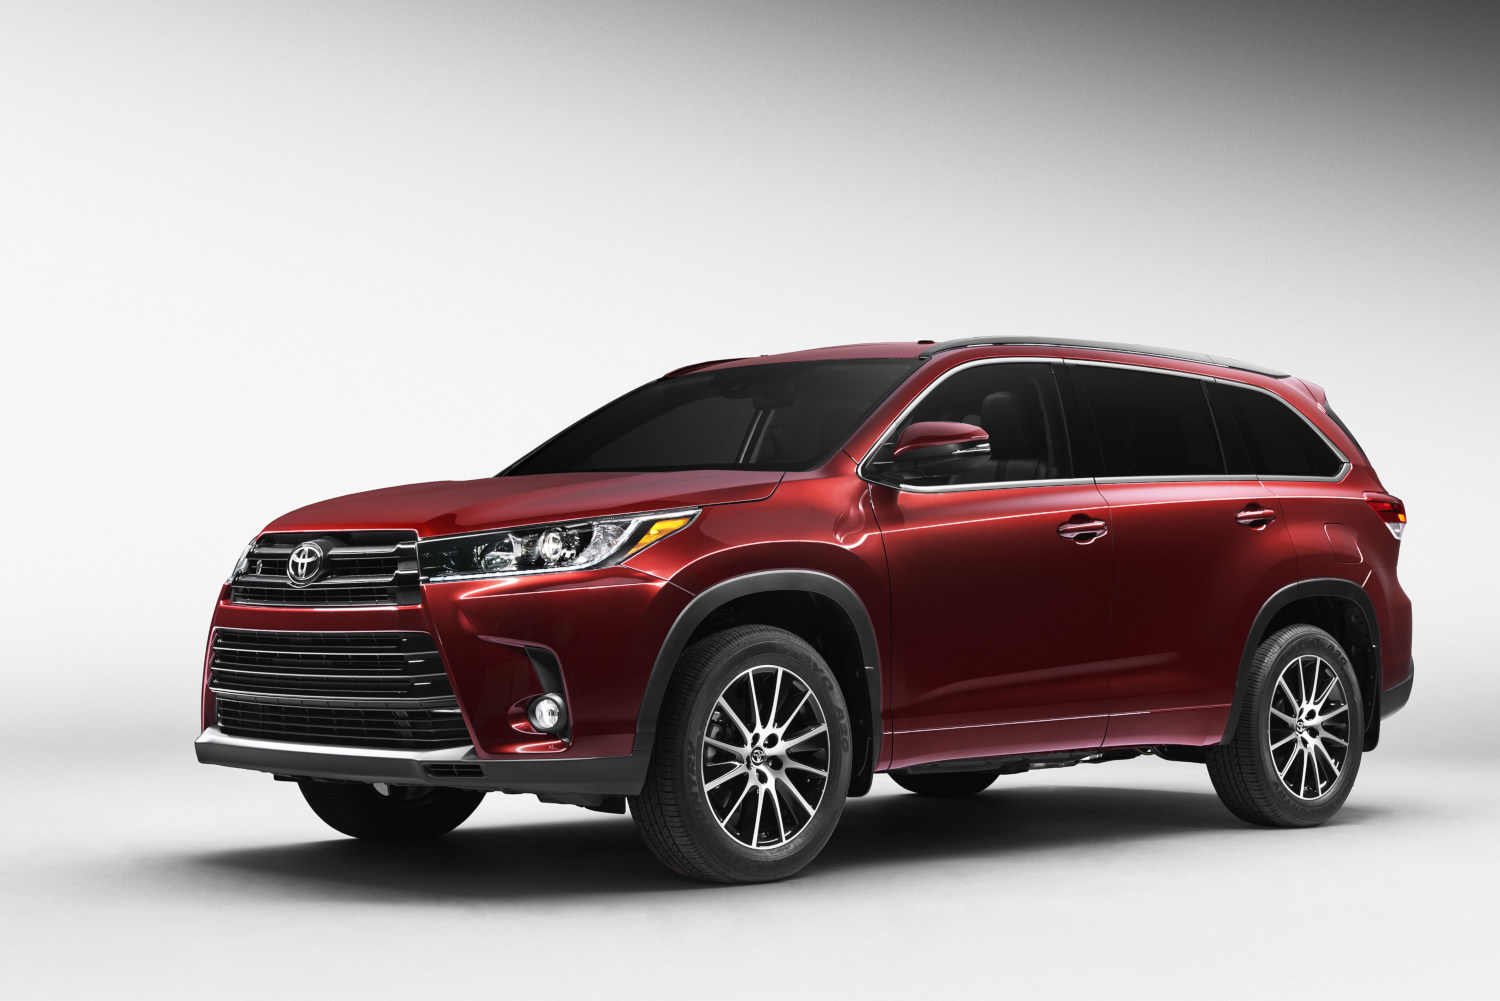 Reliable used 3-row midsize SUV: 2016 Toyota Highlander